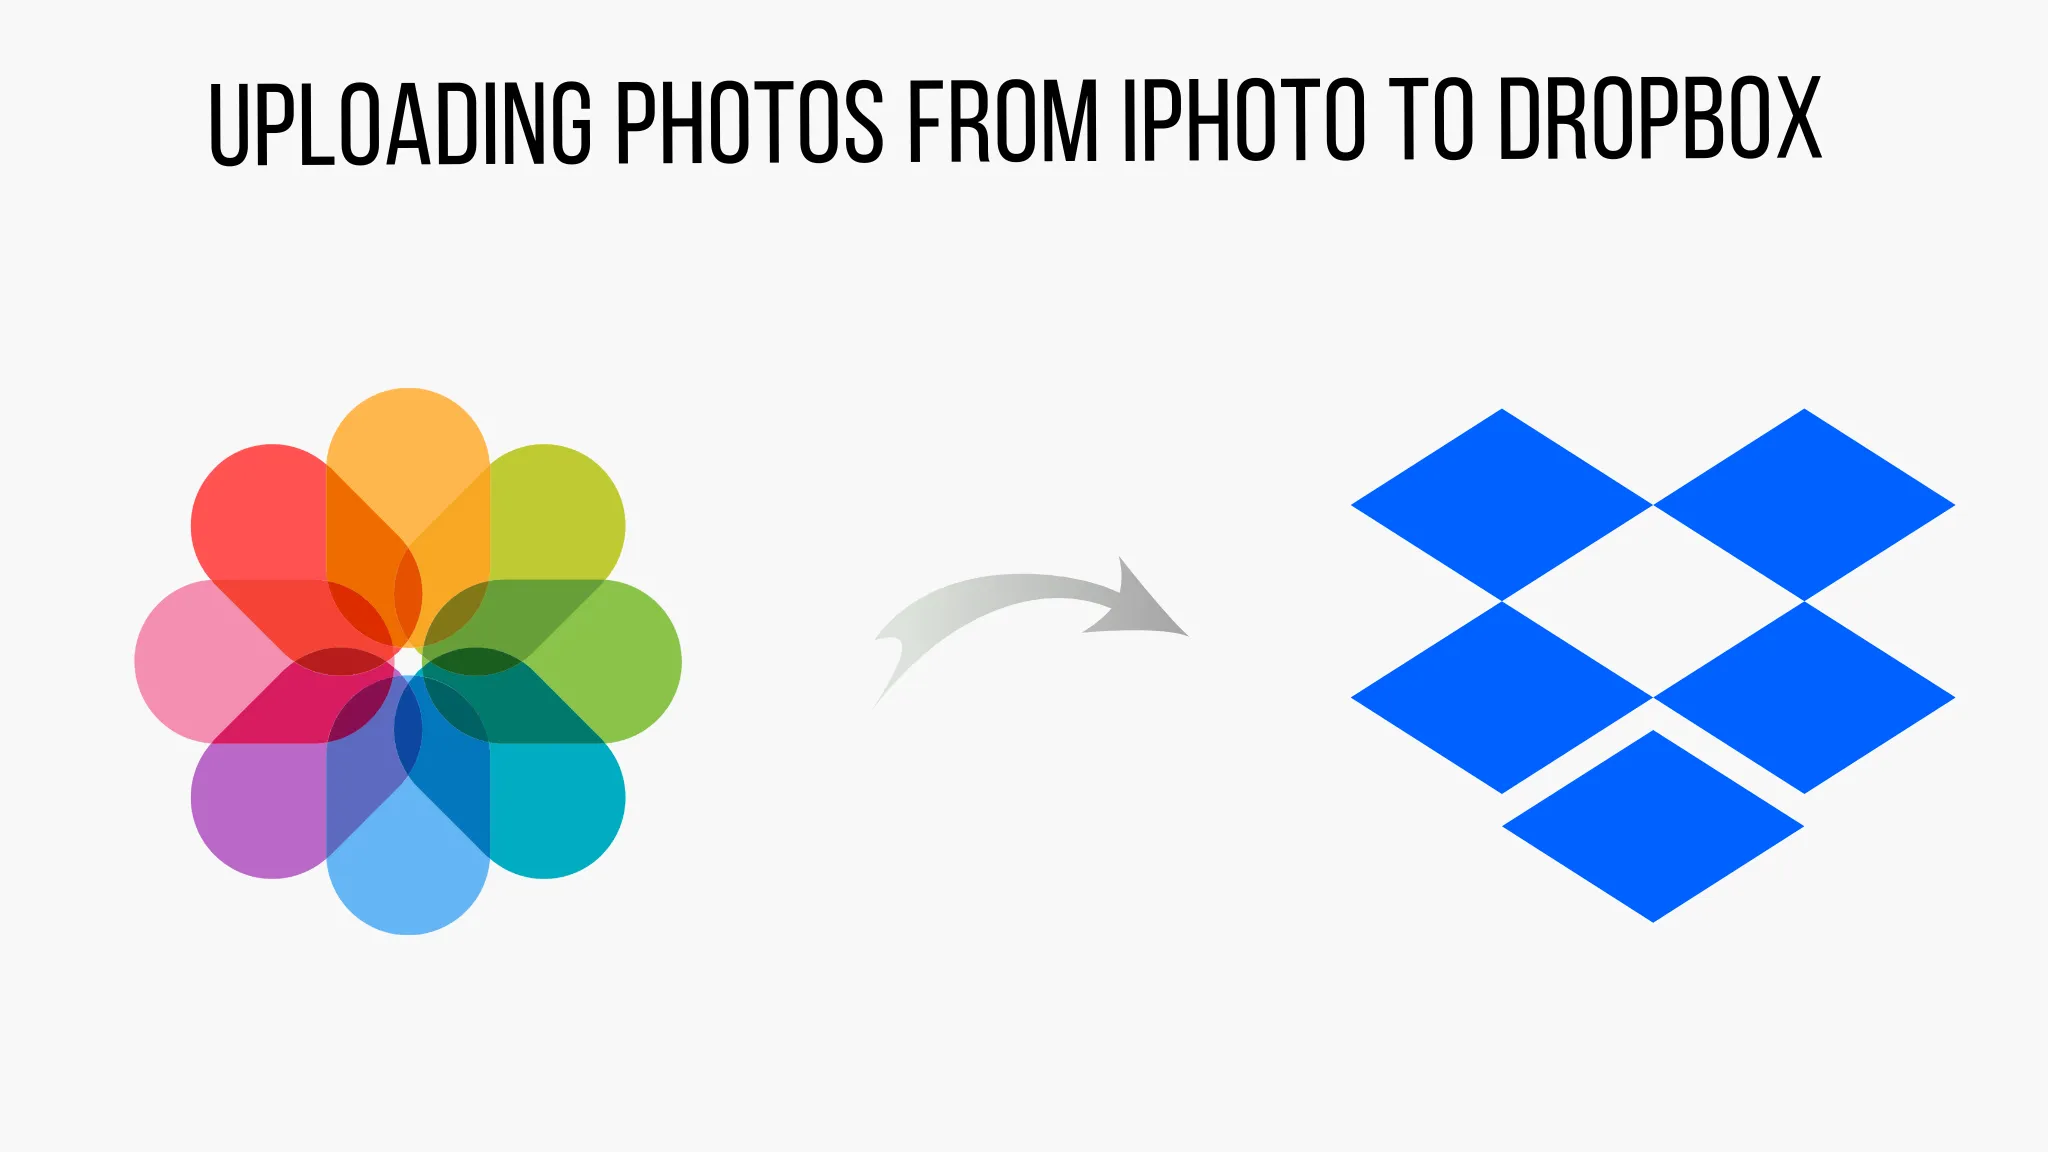 Uploading Photos from iPhoto to Dropbox